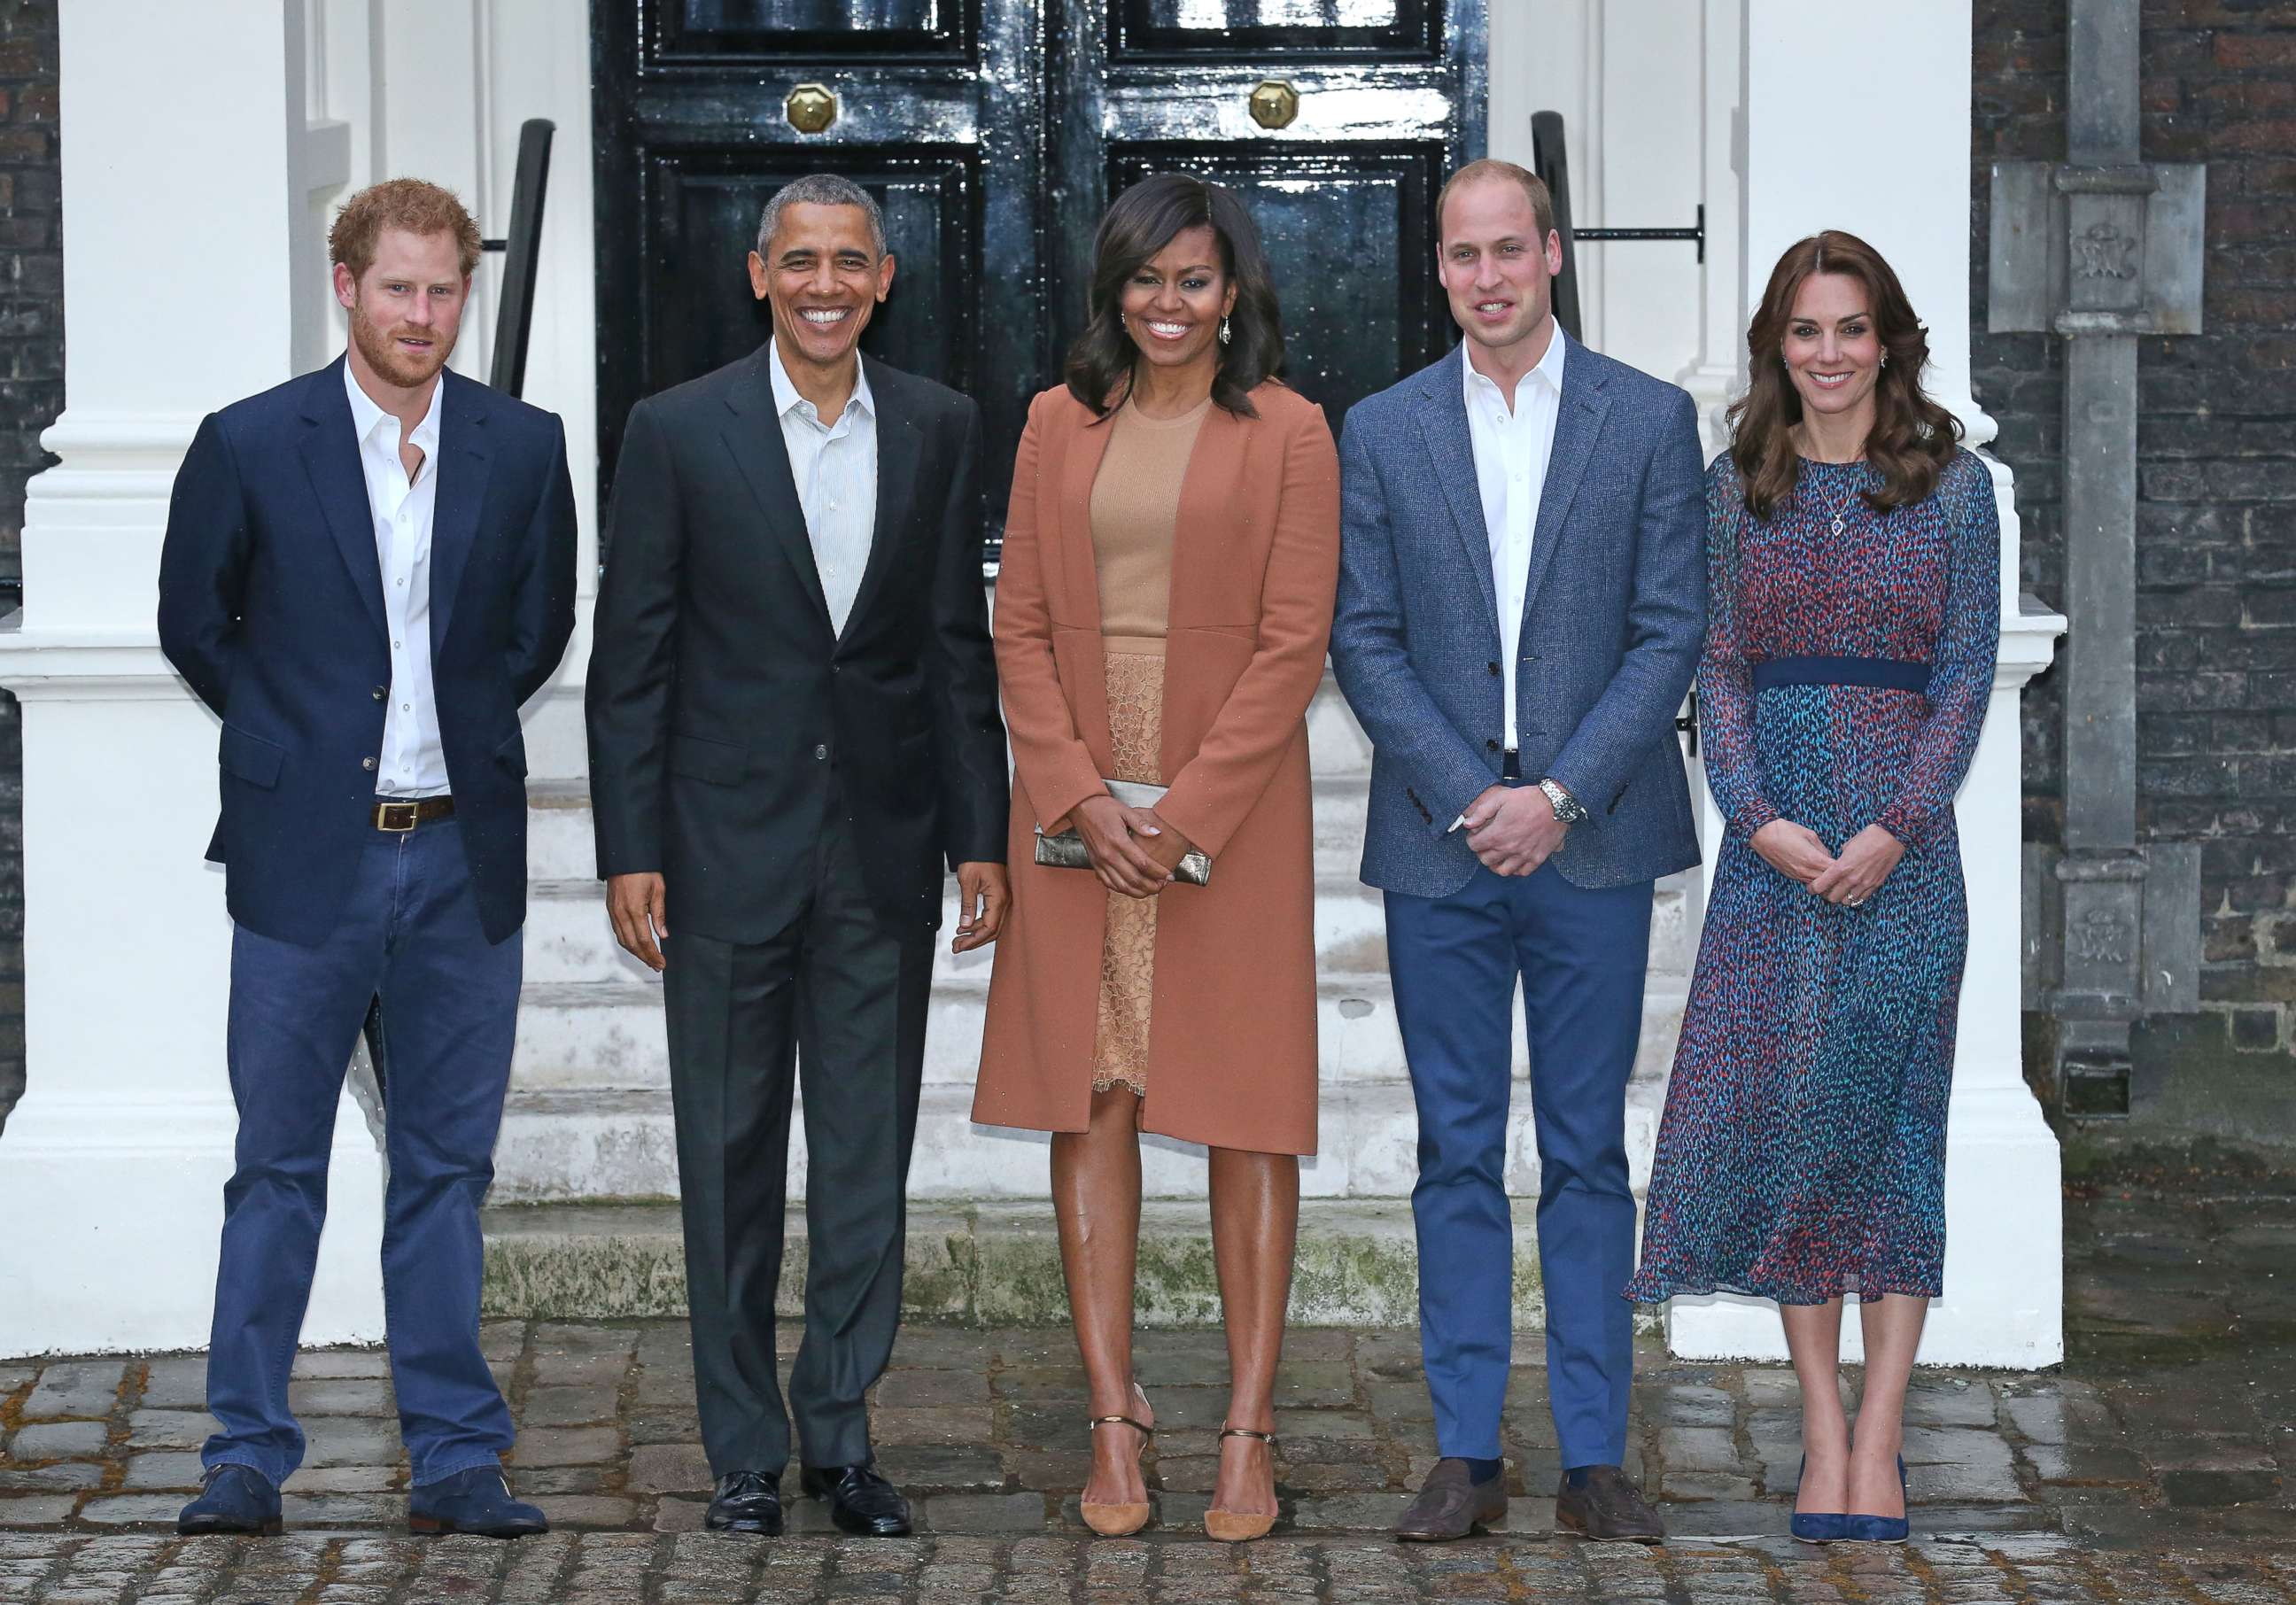 PHOTO: Prince Harry, President Barack Obama, First Lady Michelle Obama, Prince William, Duke of Cambridge and Catherine, Duchess of Cambridge pose as they attend a dinner at Kensington Palace, April 22, 2016, in London.